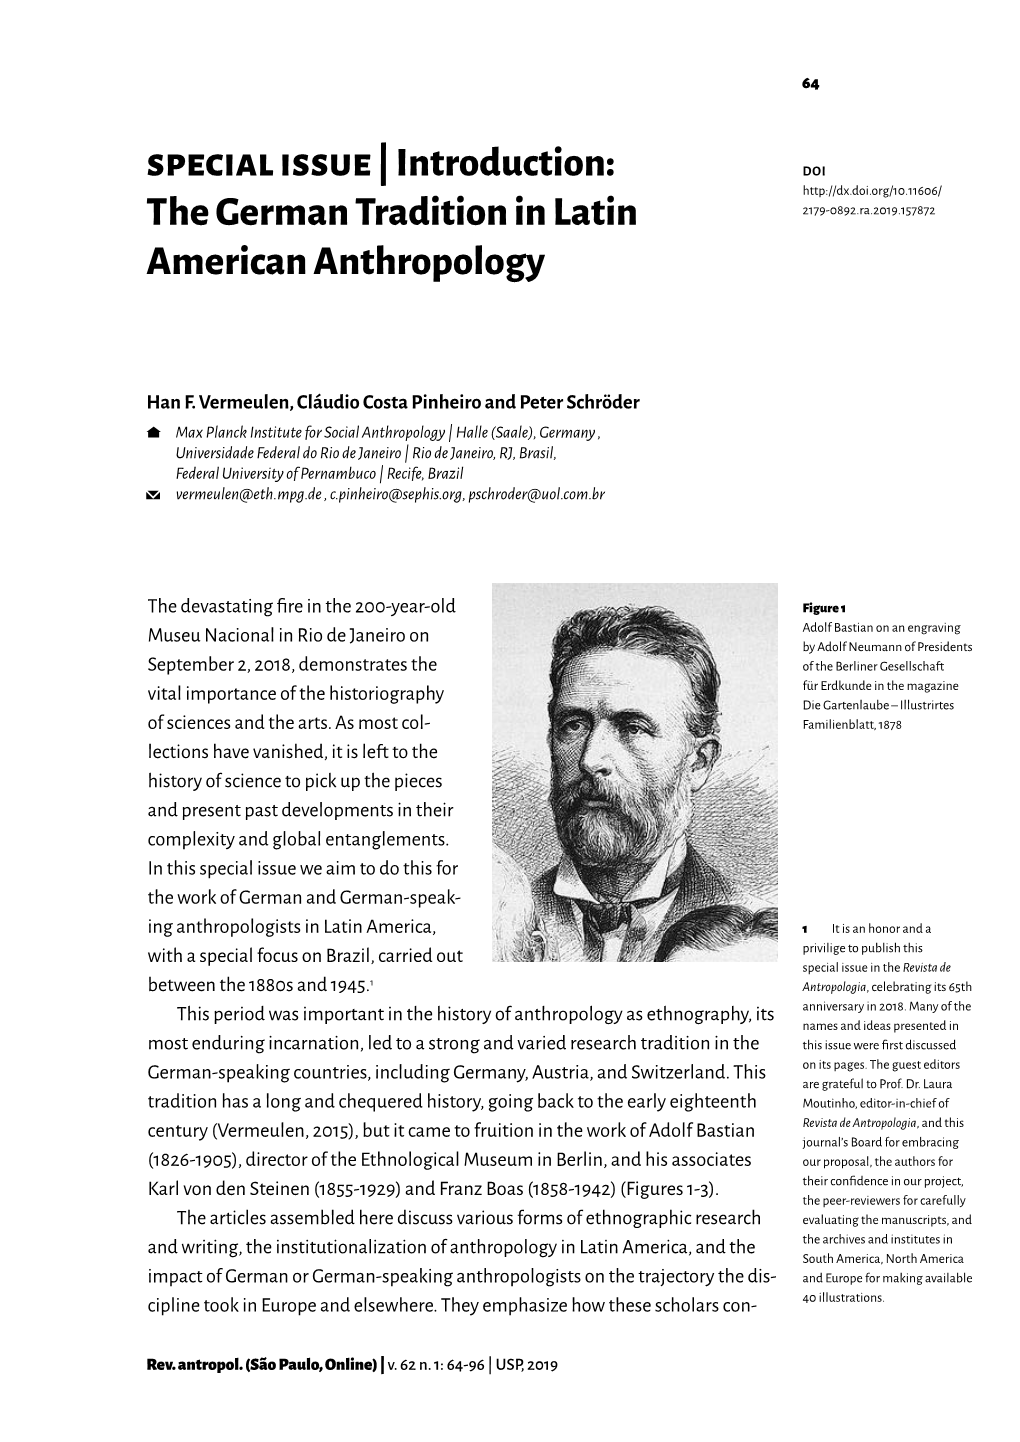 The German Tradition in Latin American Anthropology